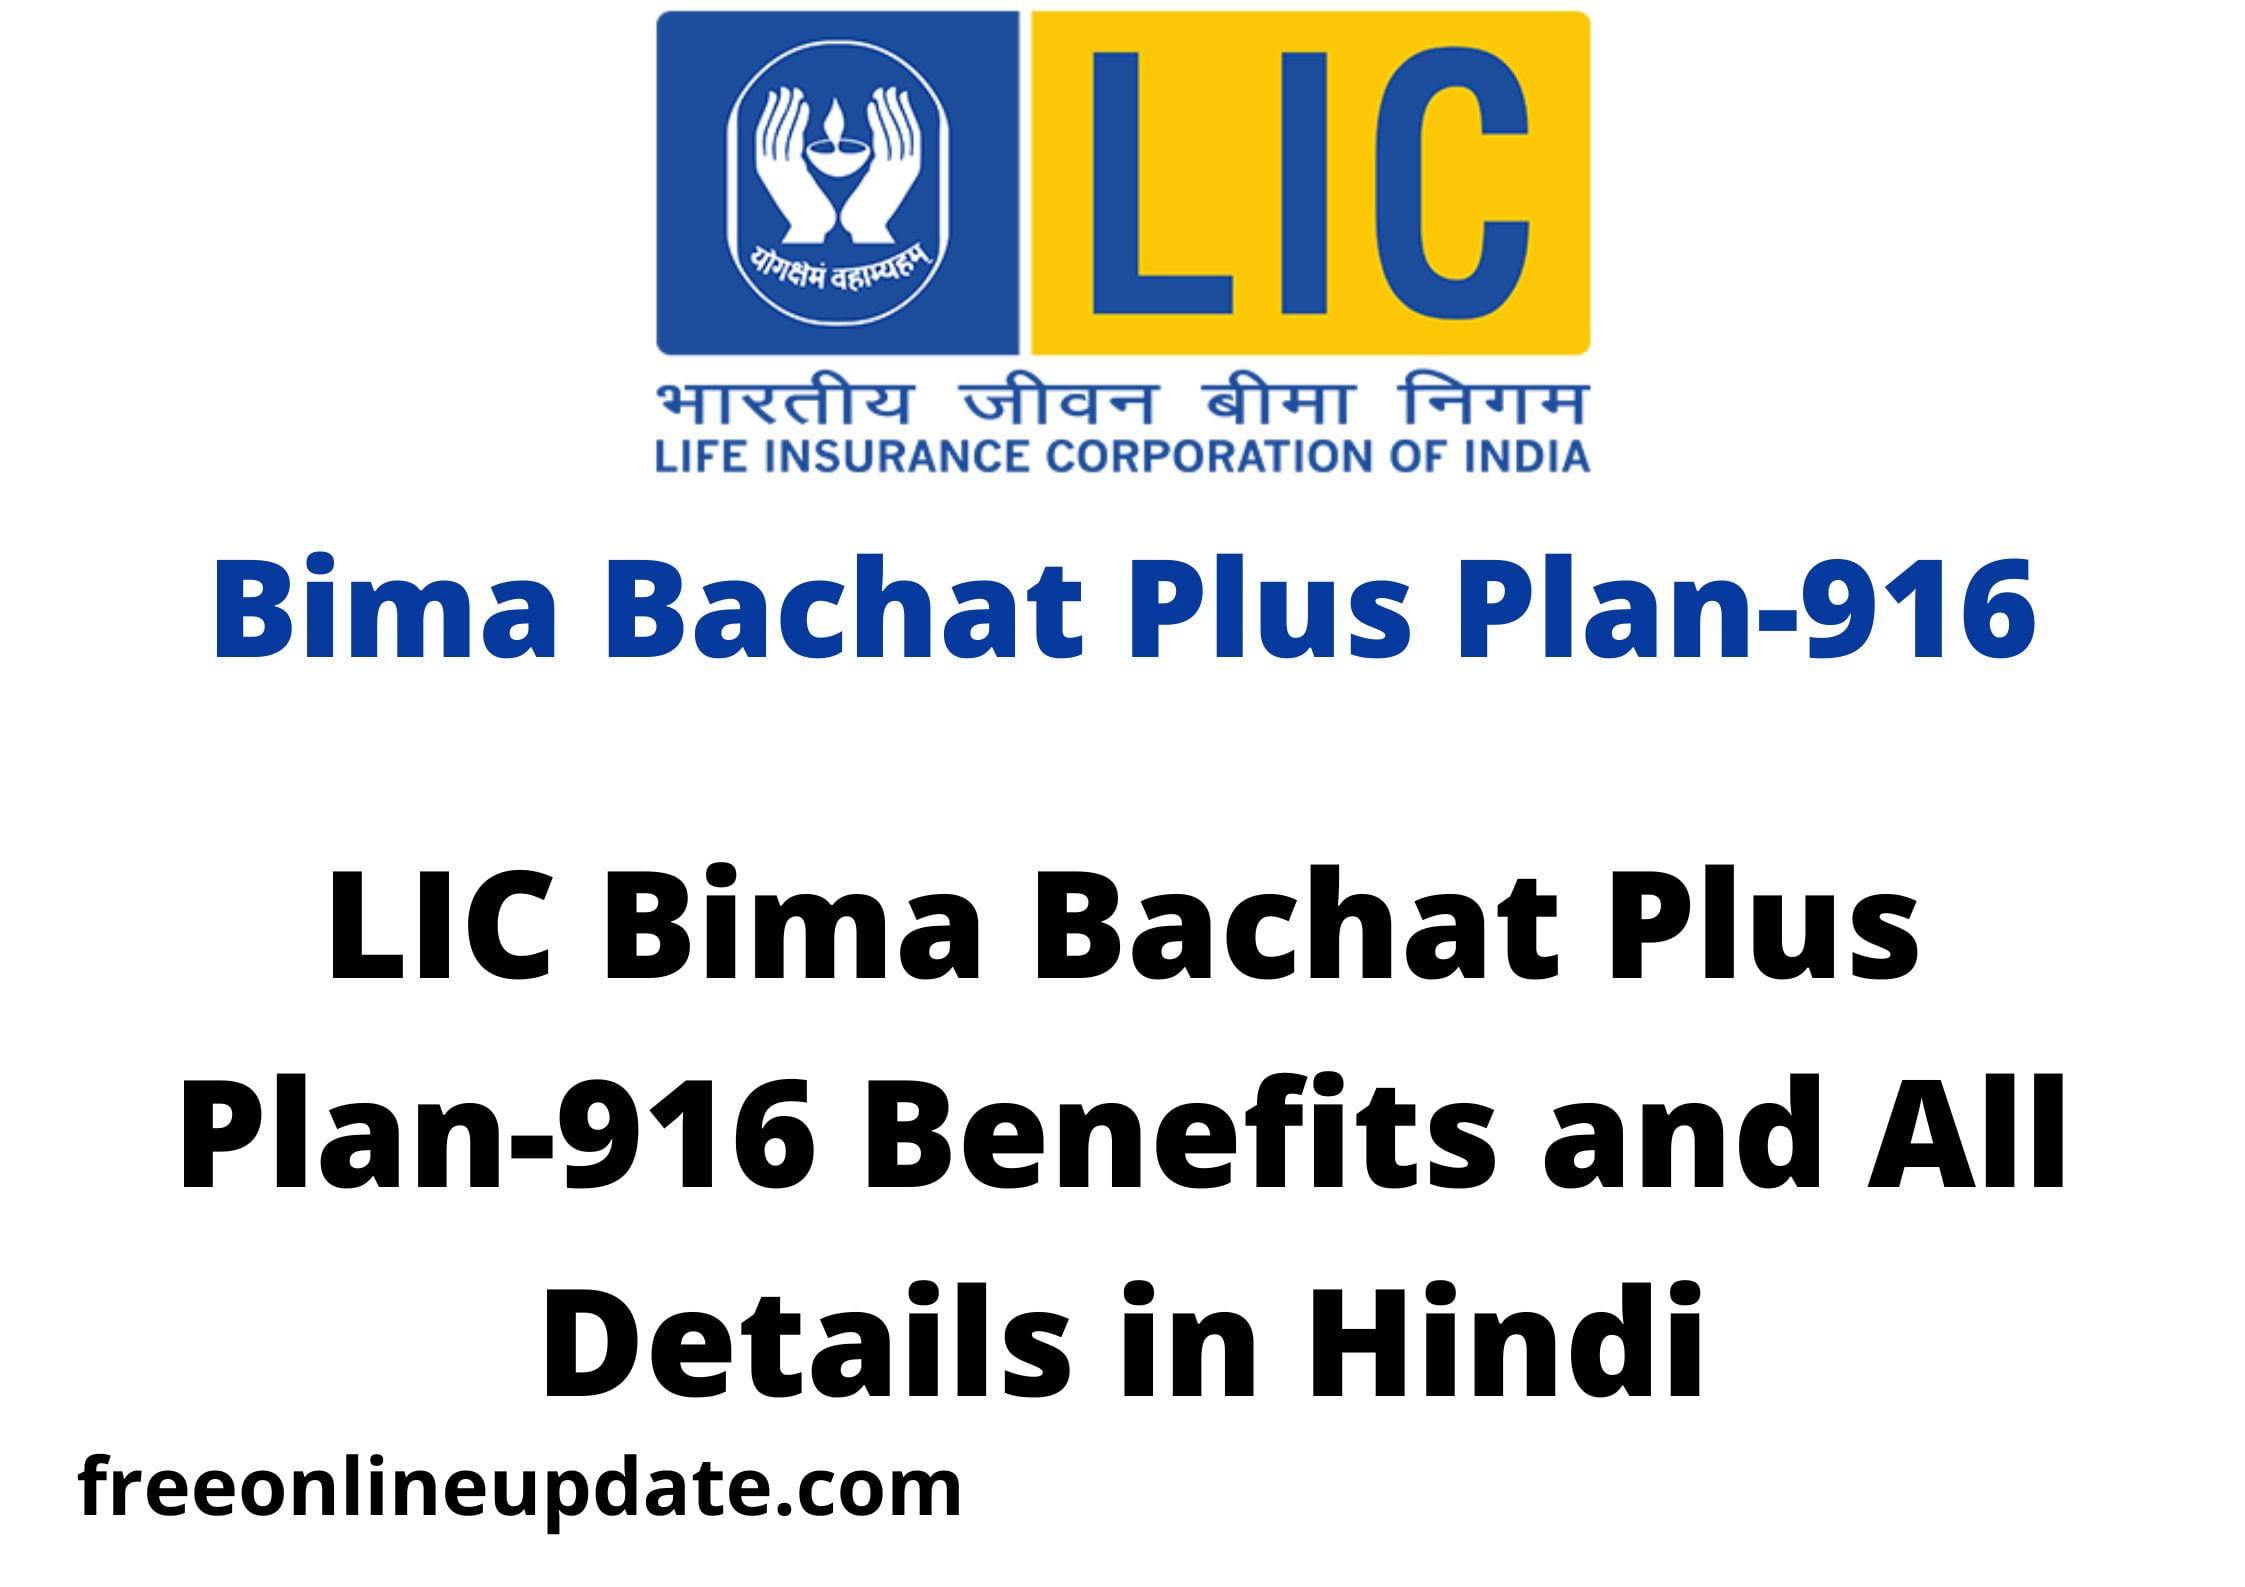 LIC Bima Bachat Plus Plan-916 Benefits and All Details in Hindi